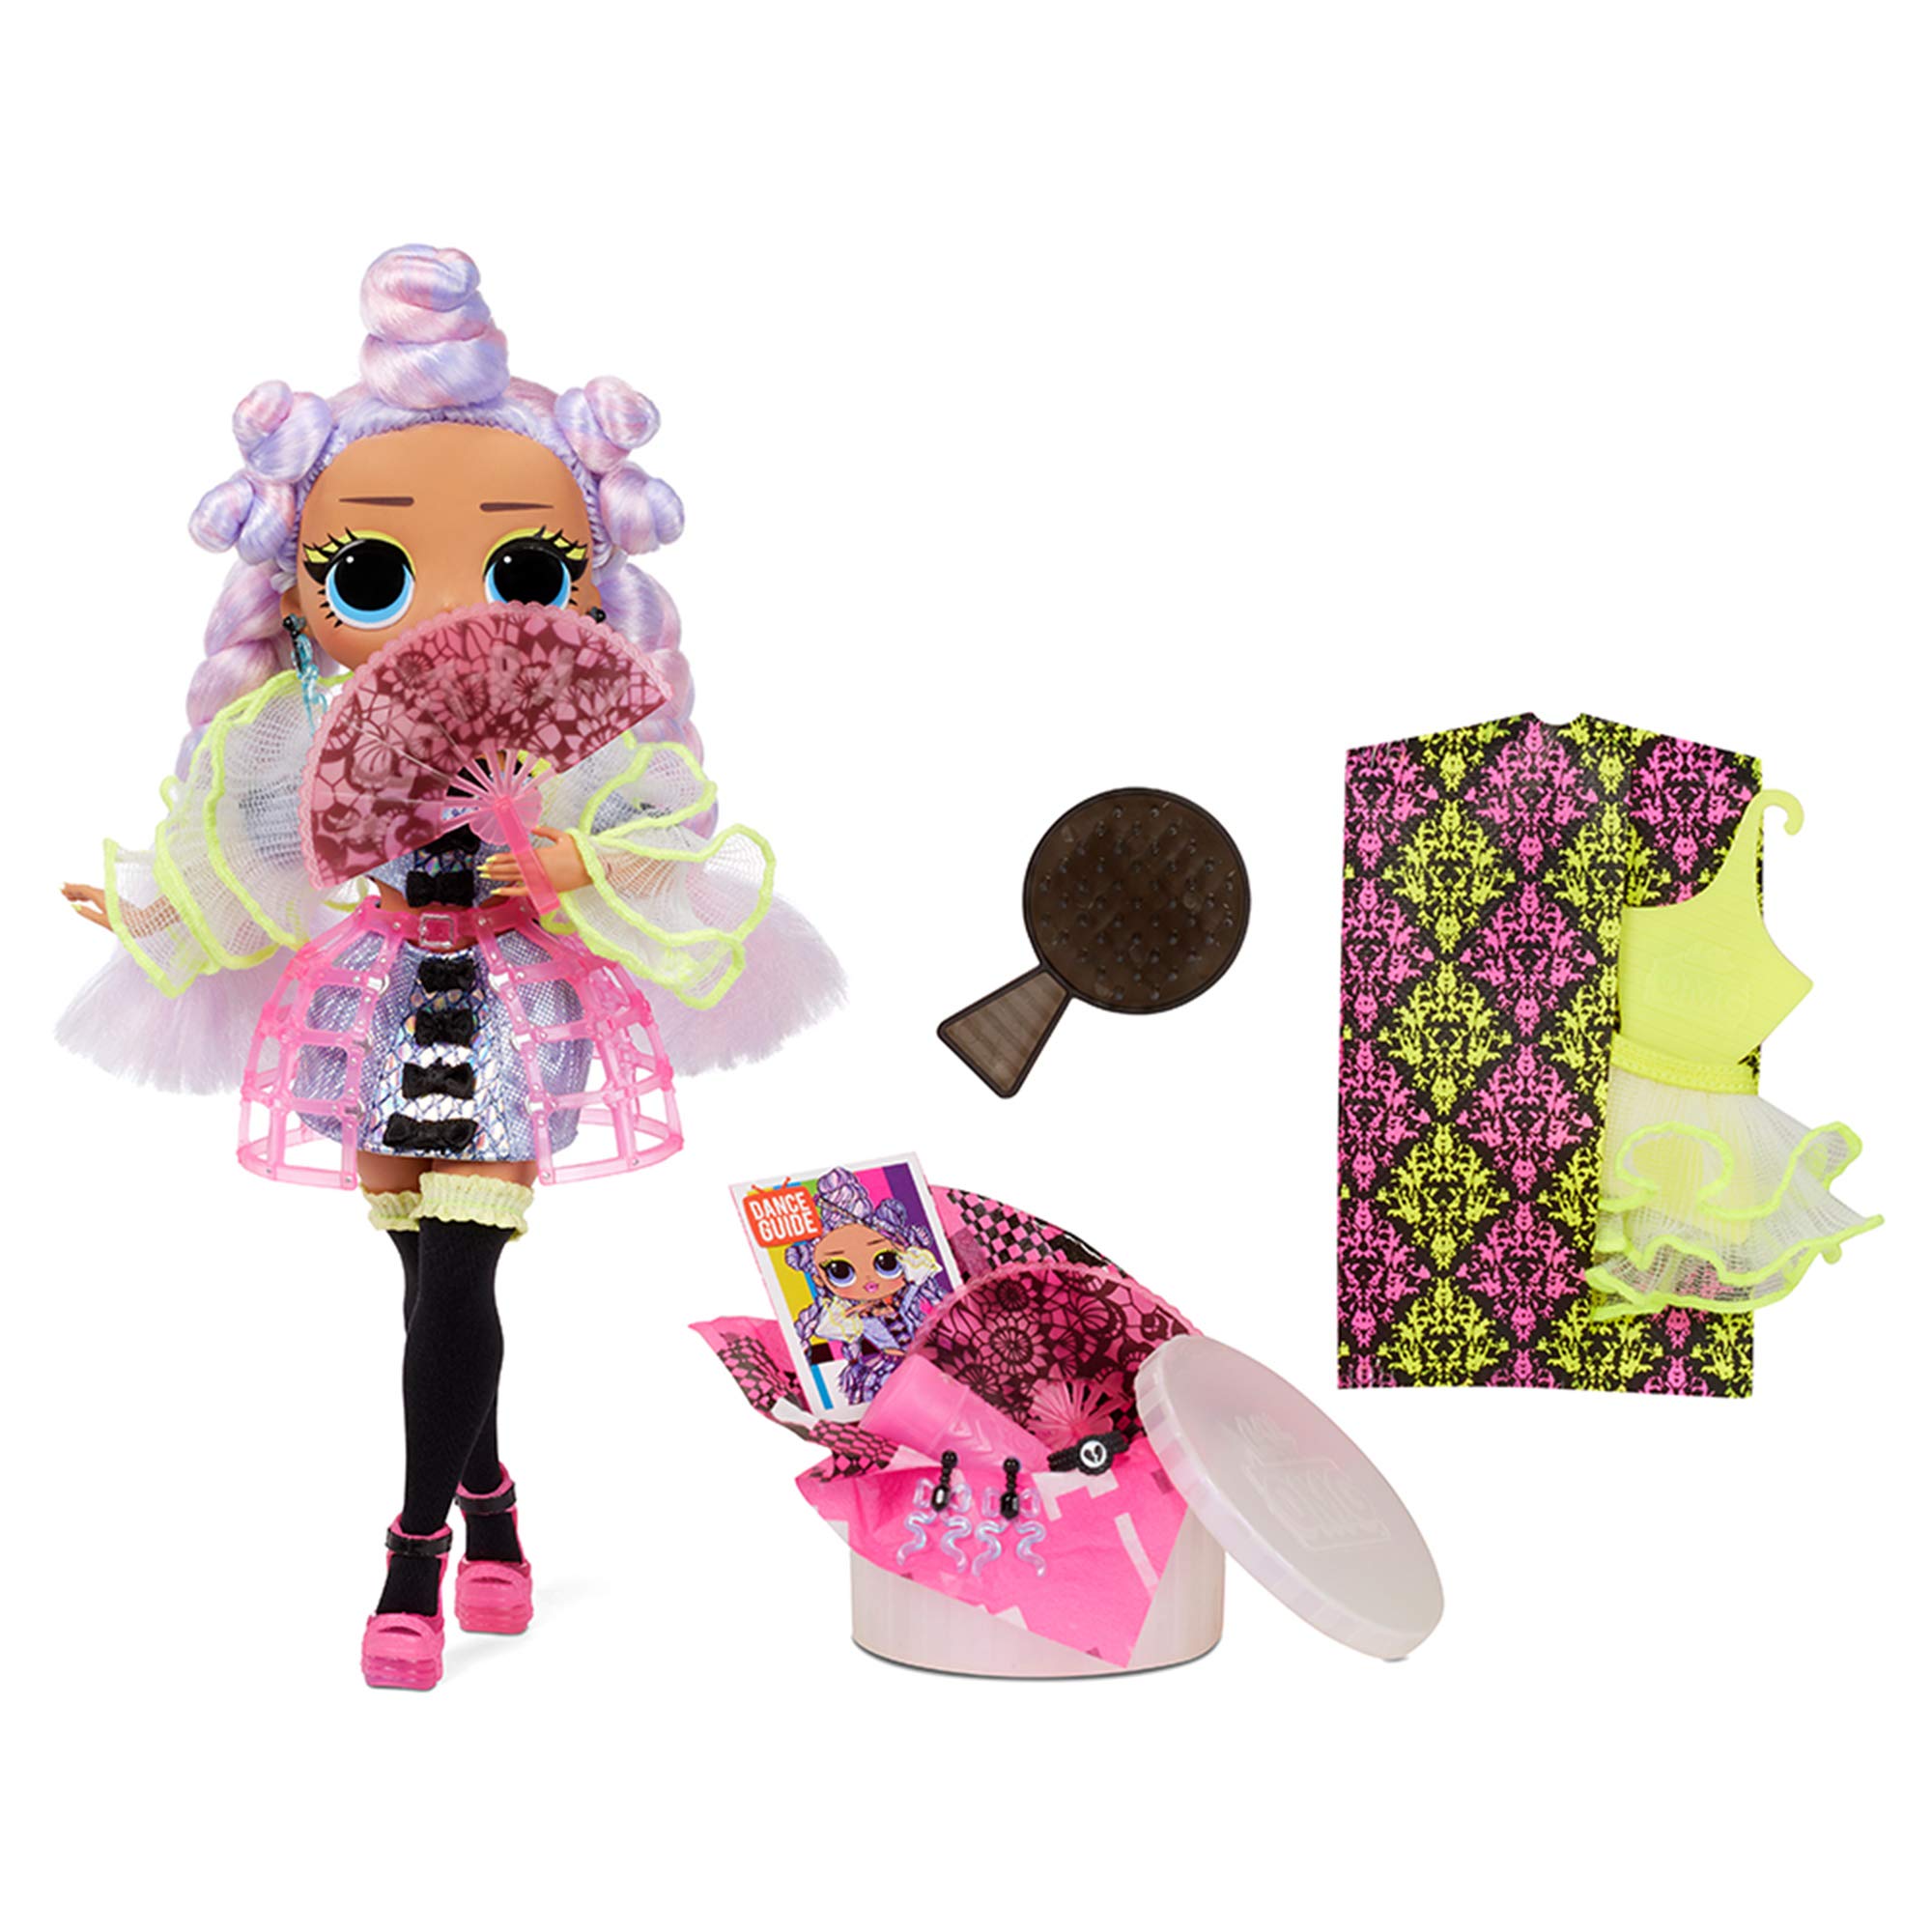 L.O.L. Surprise! OMG Dance Miss Royale Fashion Doll with 15 Surprises Including Magic Black Light, Shoes, Hair Brush, Doll Stand and TV Package - Great Gift for Girls Ages 4+